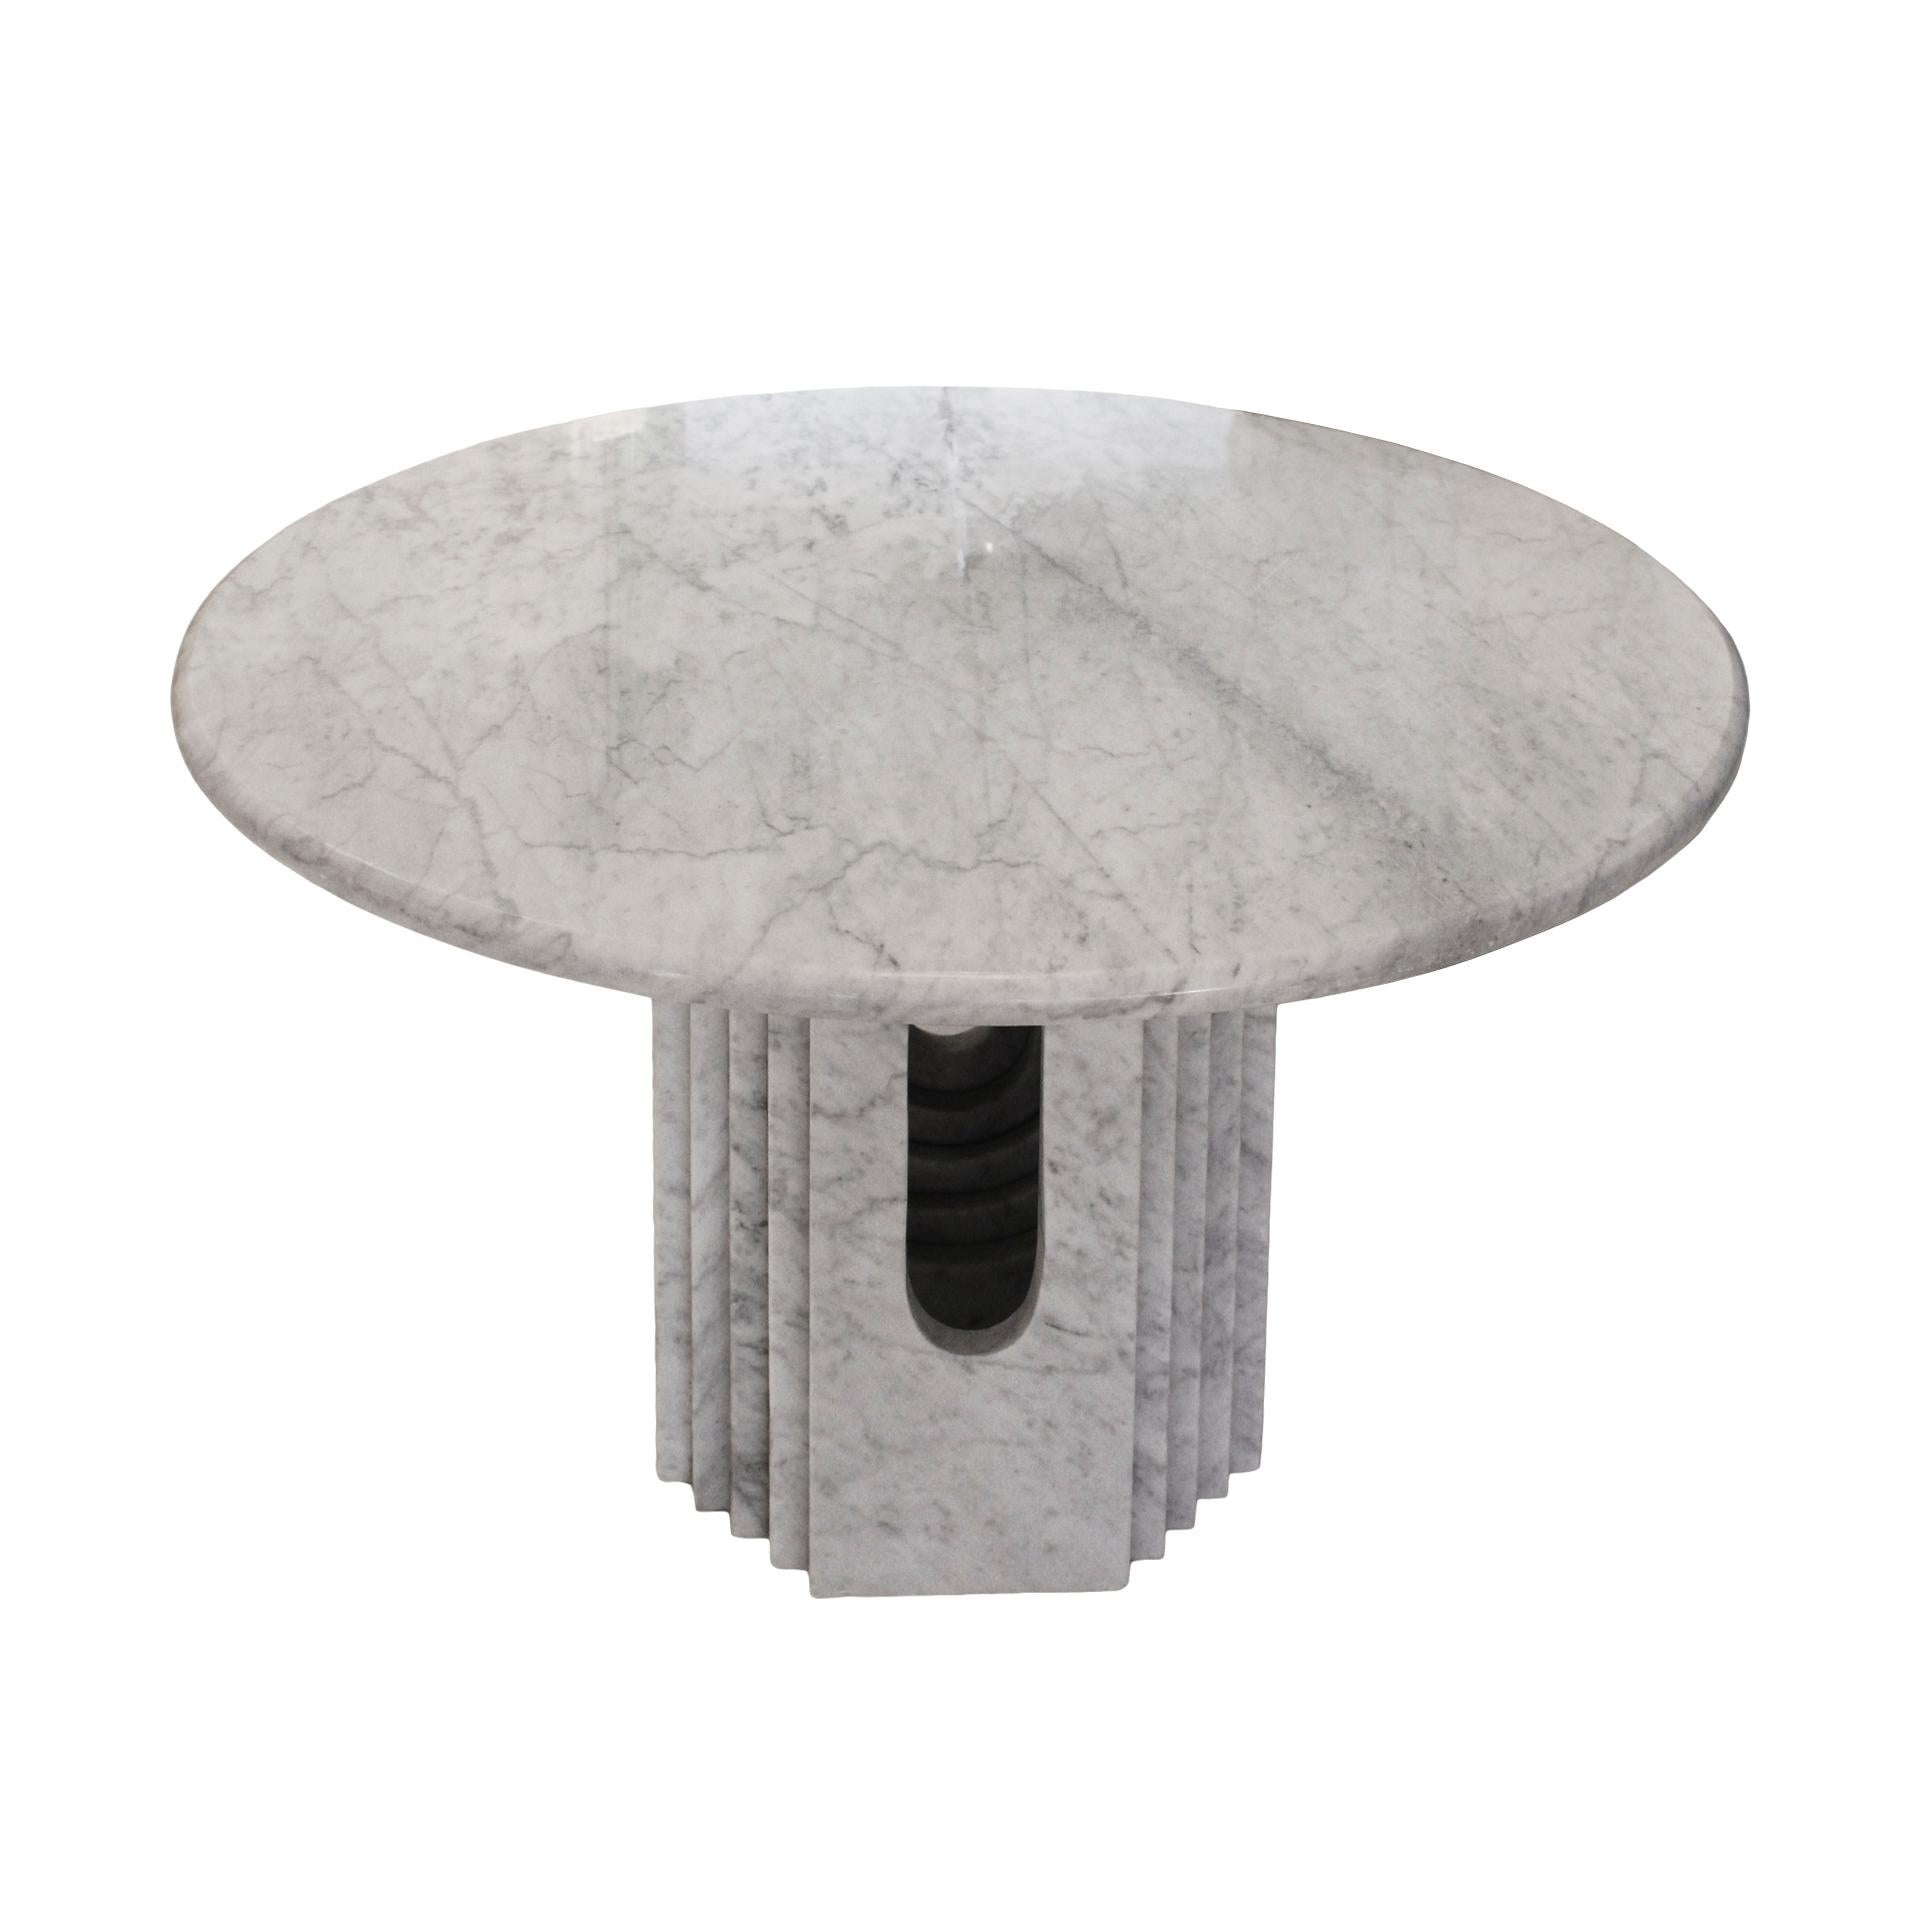 Postmodernist pedestal table with Carrara marble sculpture base designed by Carlo Scarpa for Cattelan in Italy, 1970s.

Measurements: Diameter 117 x H 73 cm

Alberto Carlo Scarpa was born on June 2 in Venice, the son of Antonio Scarpa, and Emma